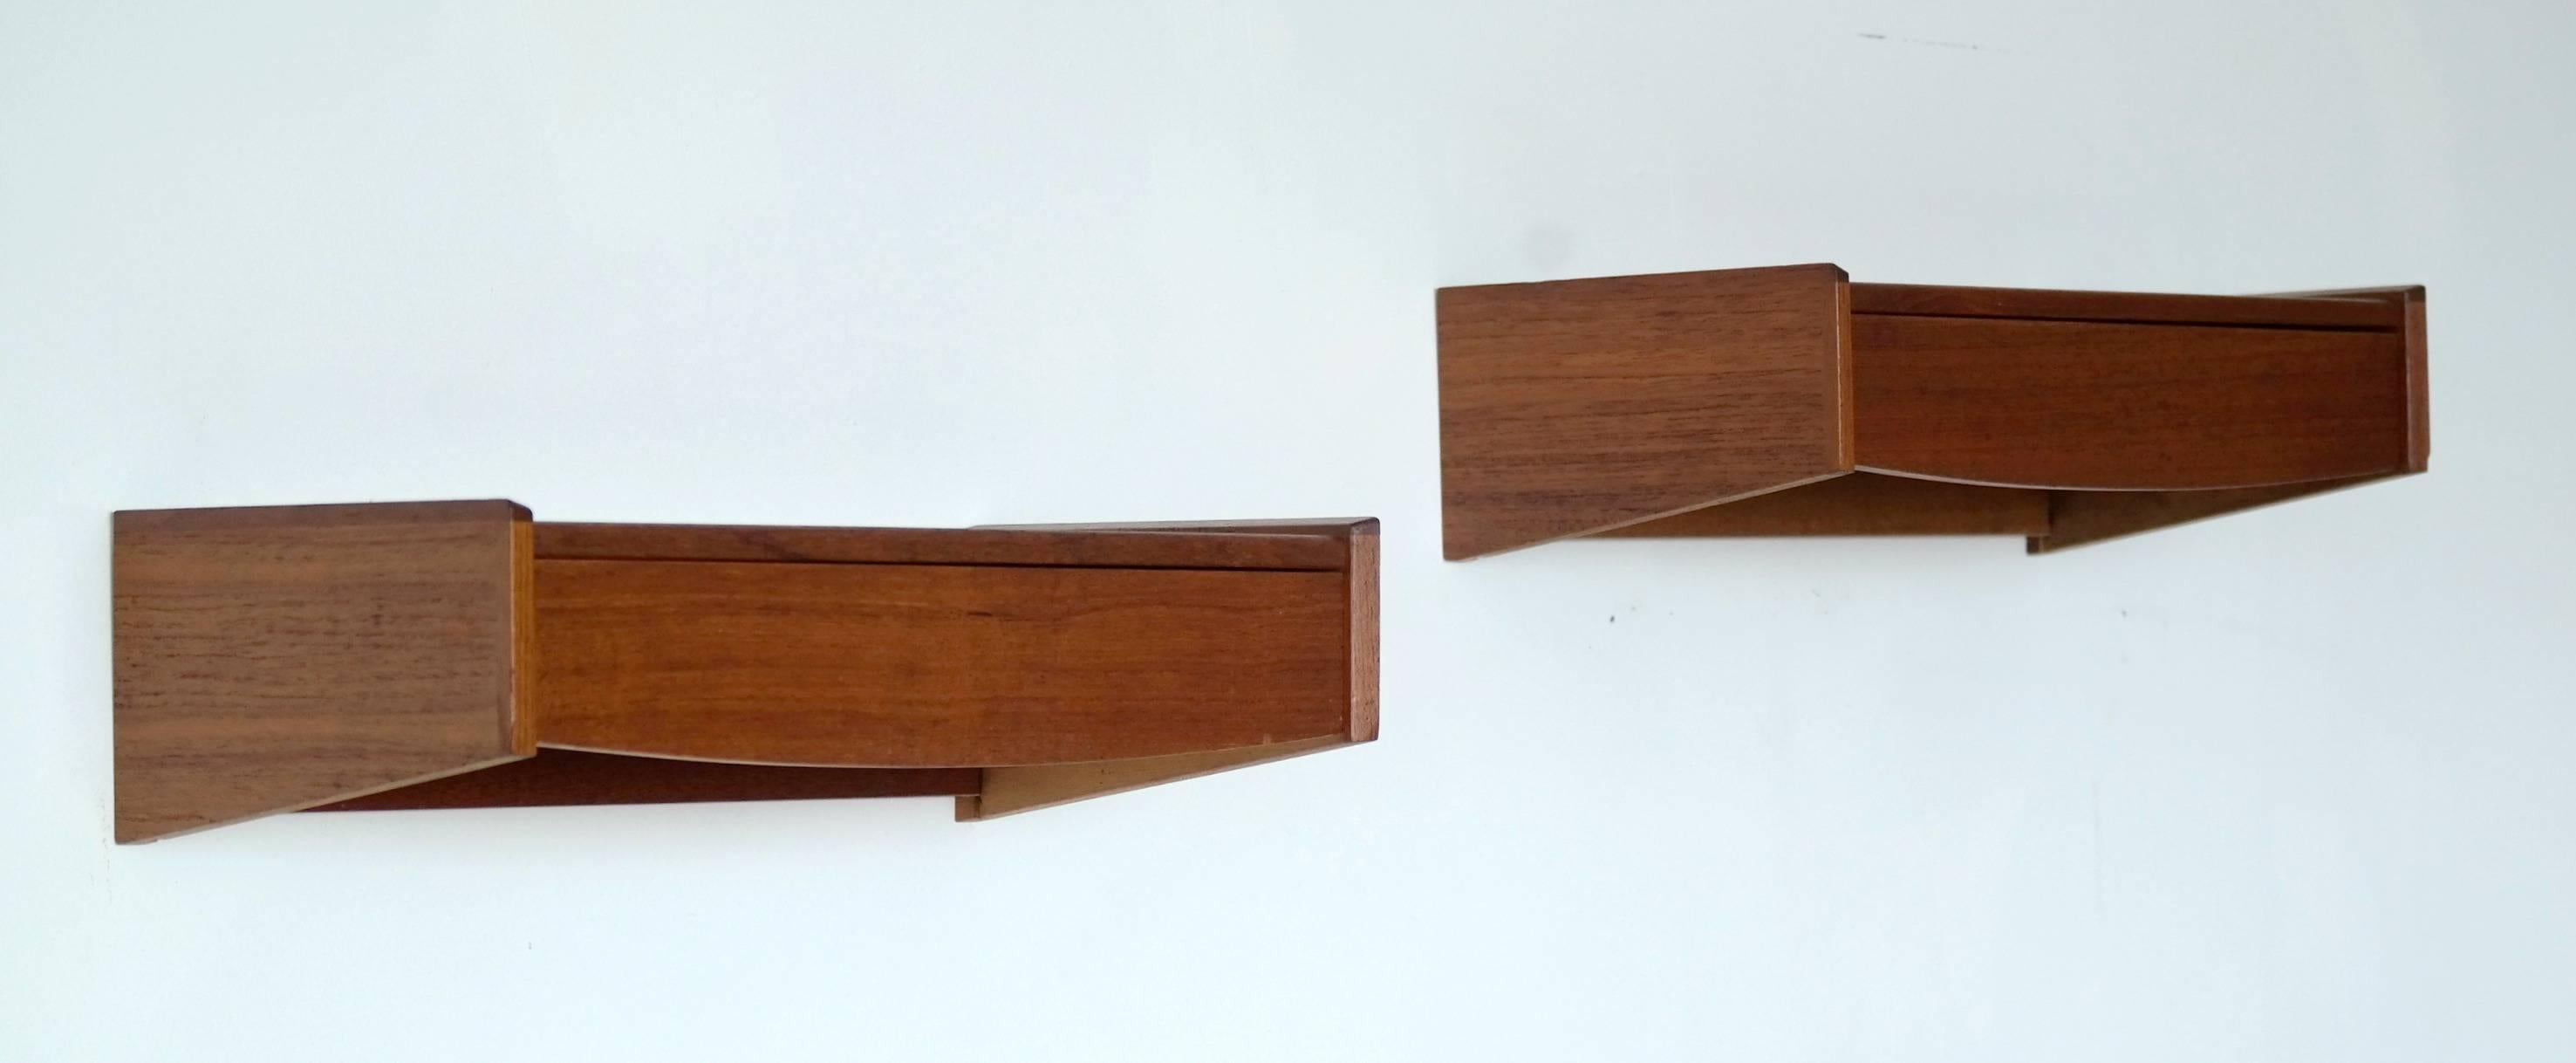 Very nice pair of teak floating shelves in the style of Arne Hovmand-Olsen. Made in Denmark, circa 1950s. Teak veneer with solid edges. Excellent condition.